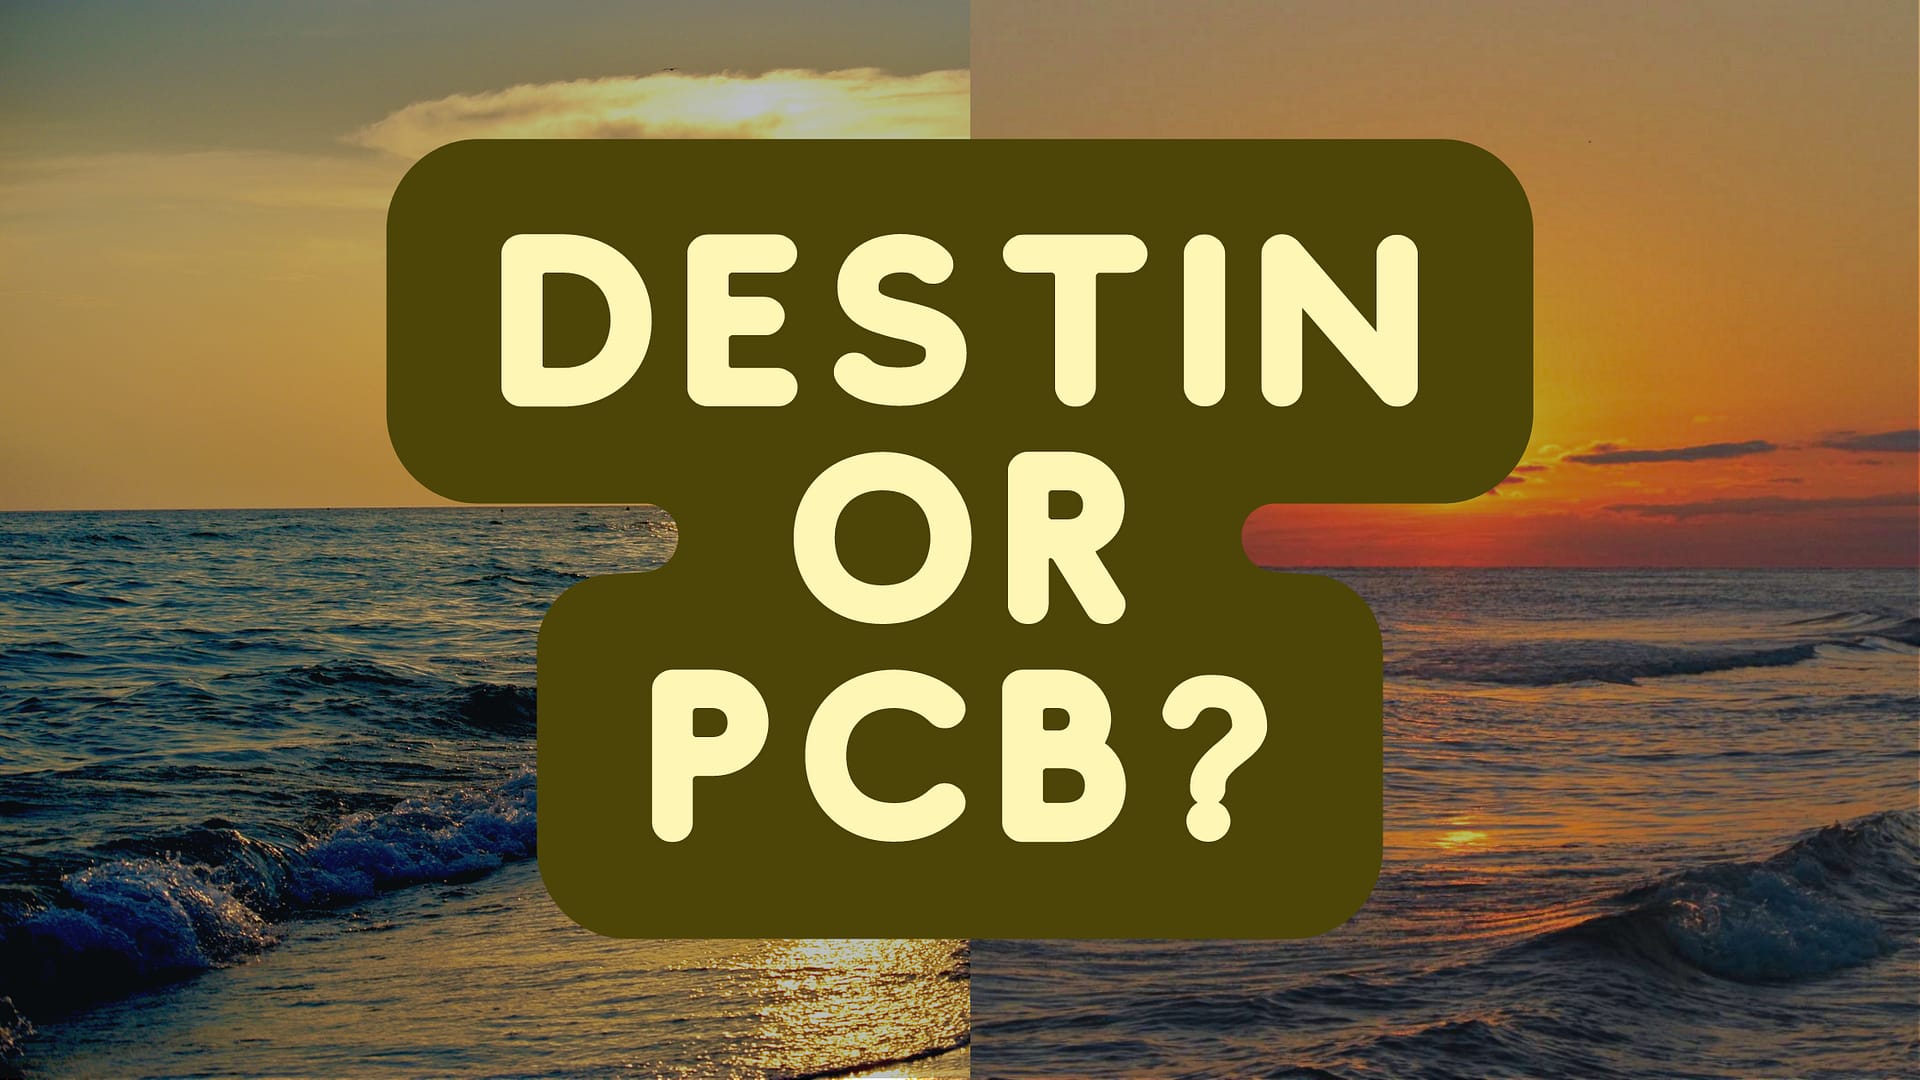 sunset beach image with text of Destin vs. PCB